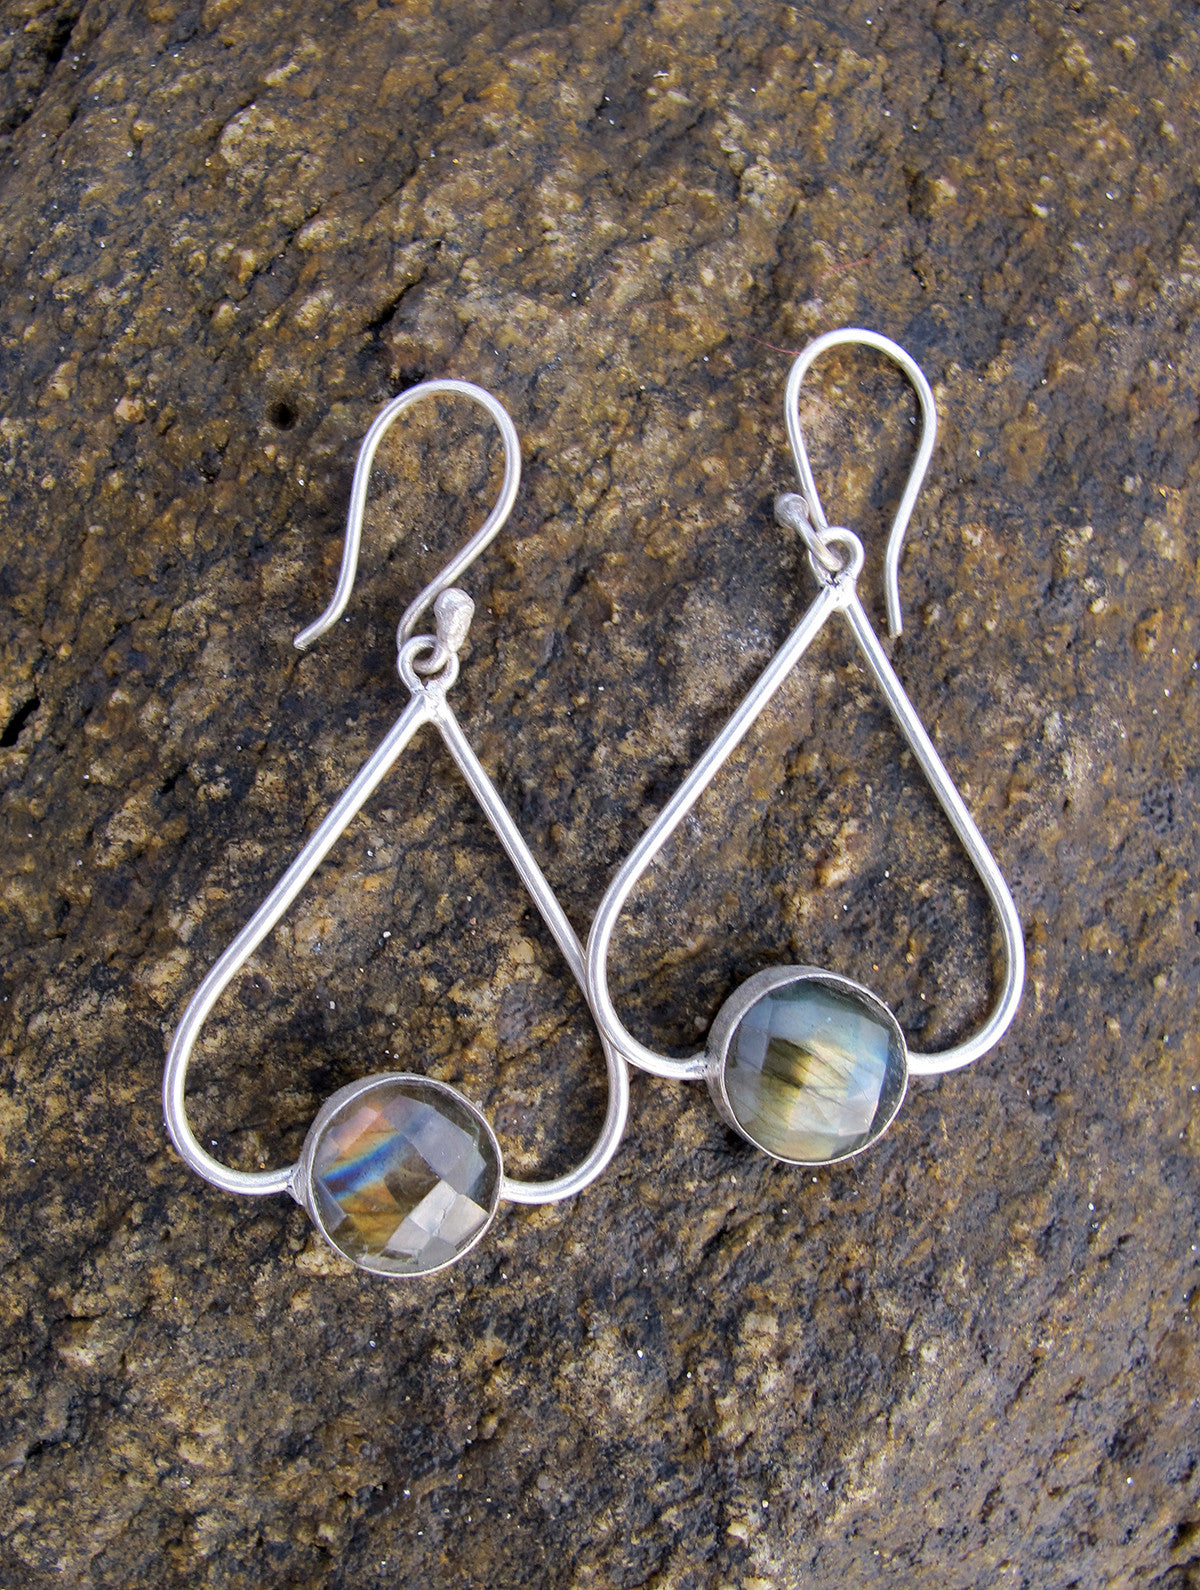 Faceted Stone Earrings